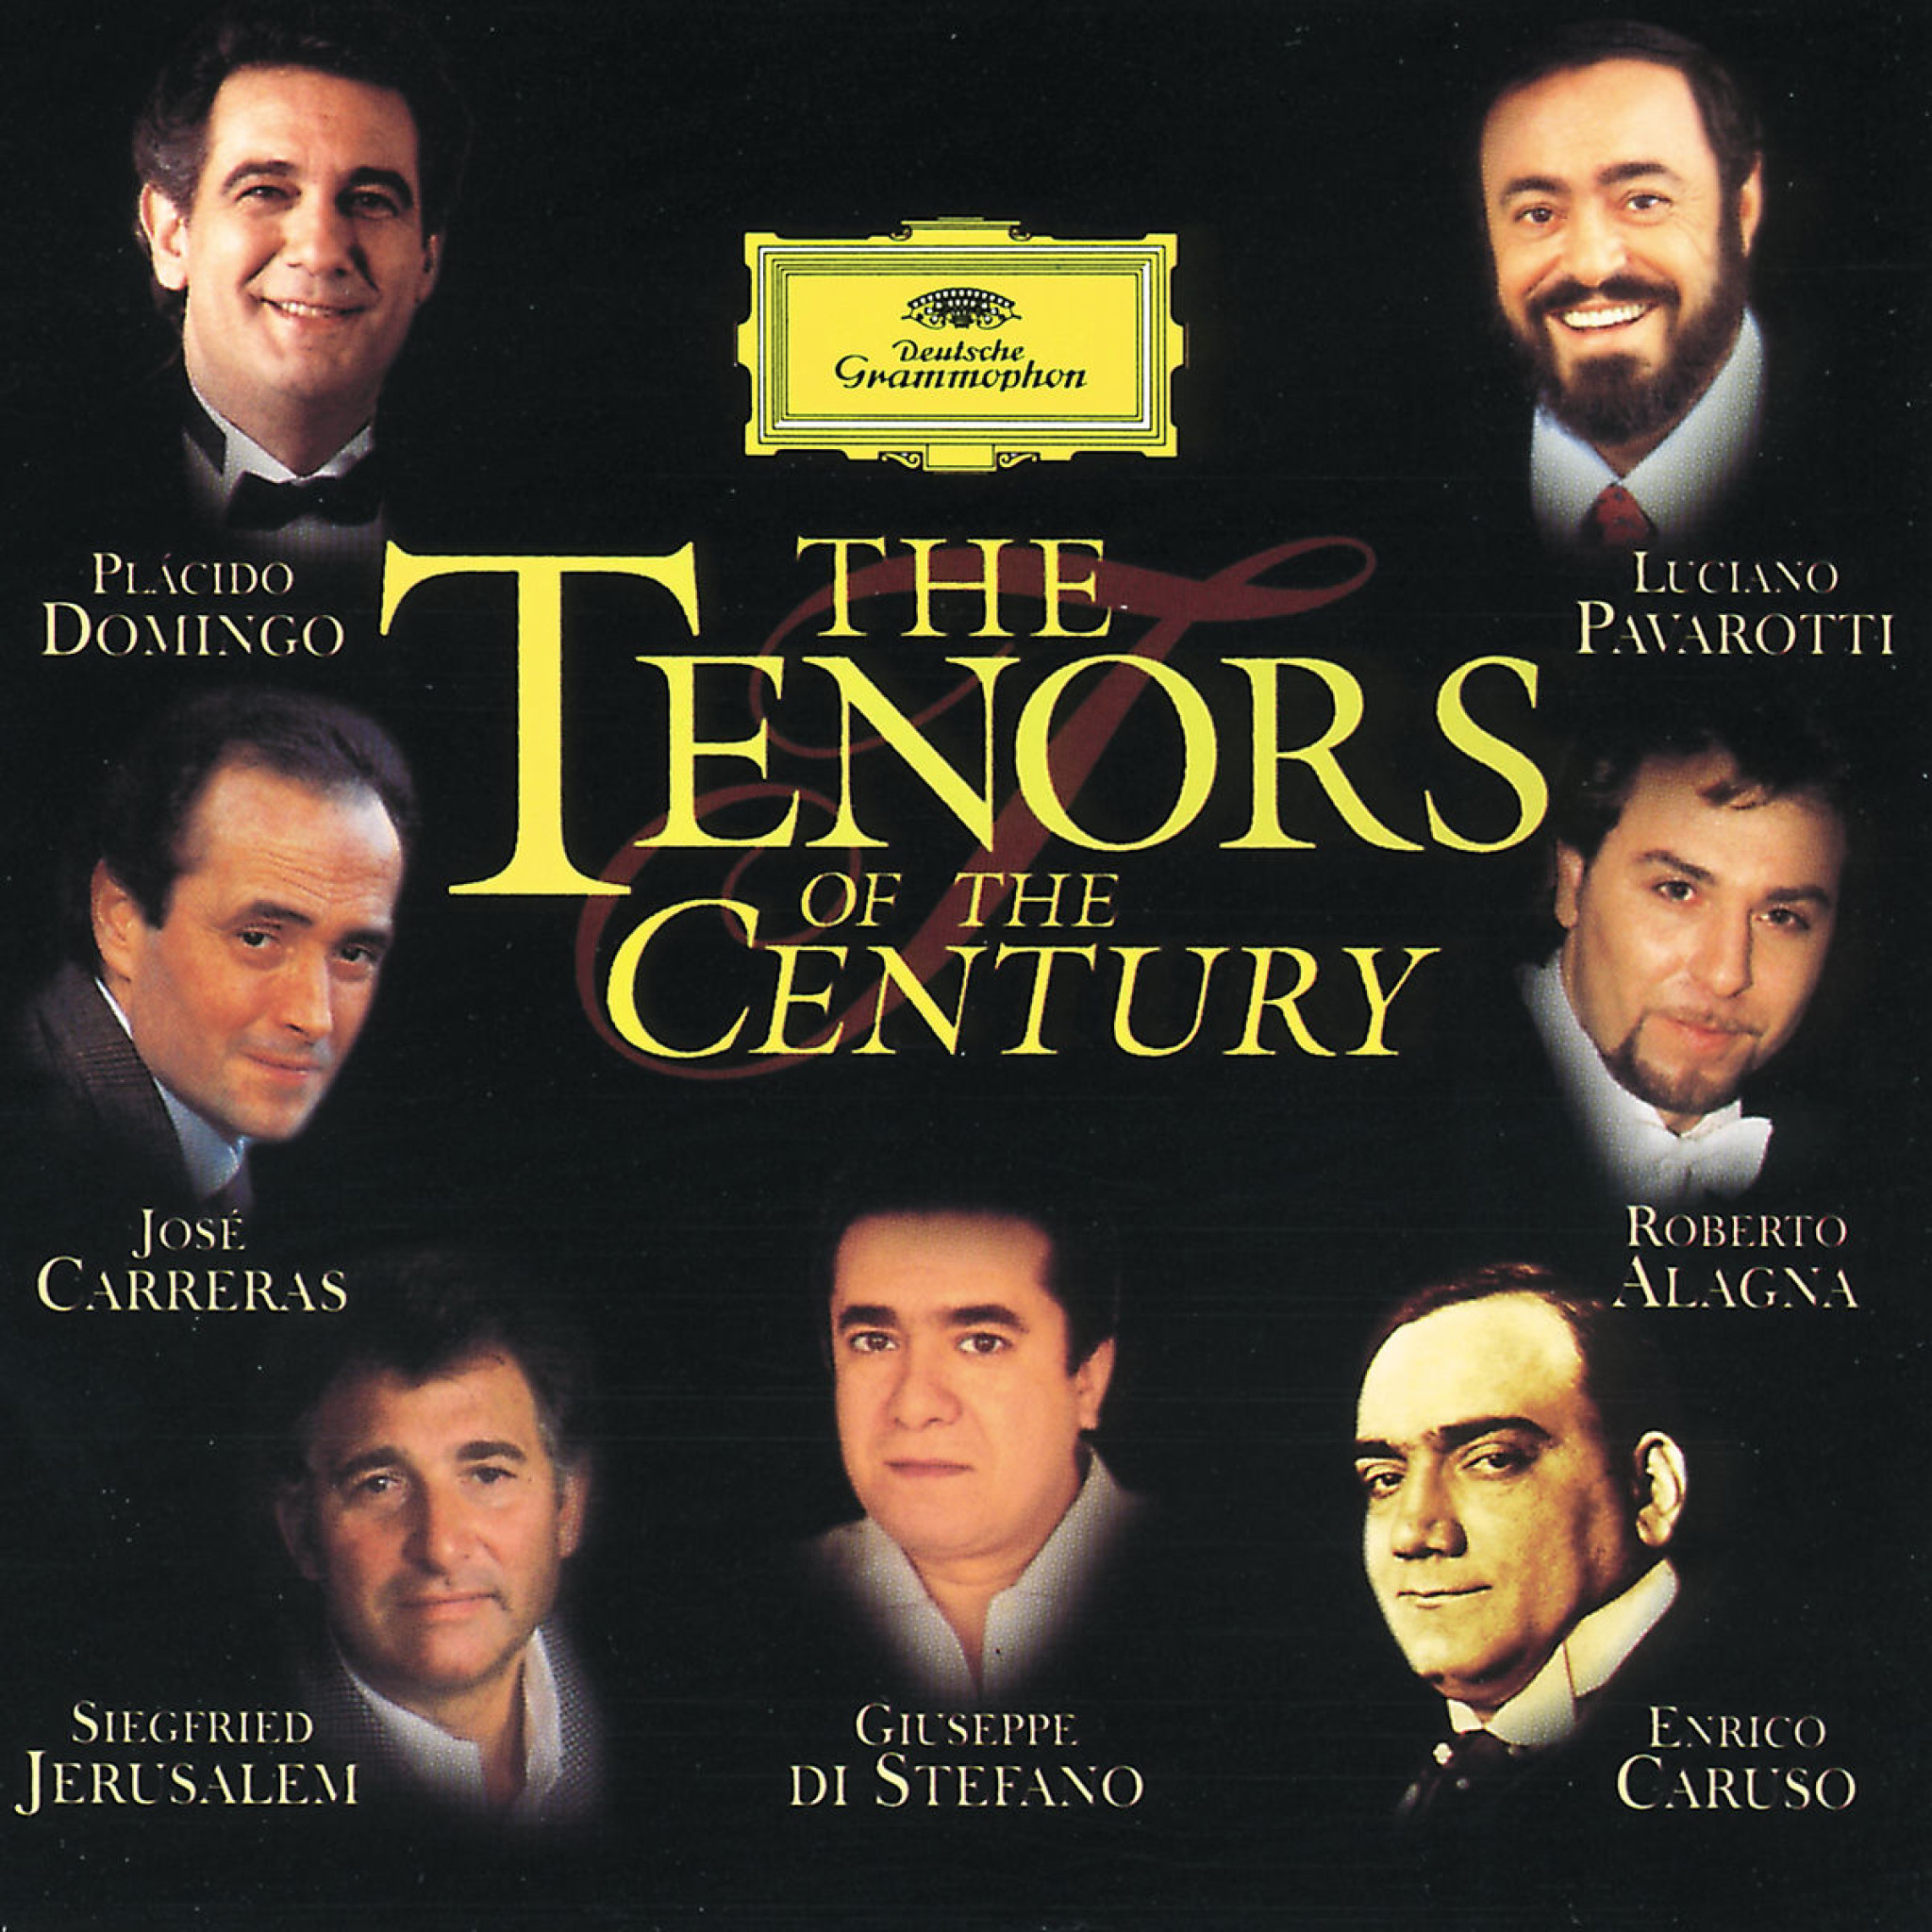 The Greatest Tenors of the Century